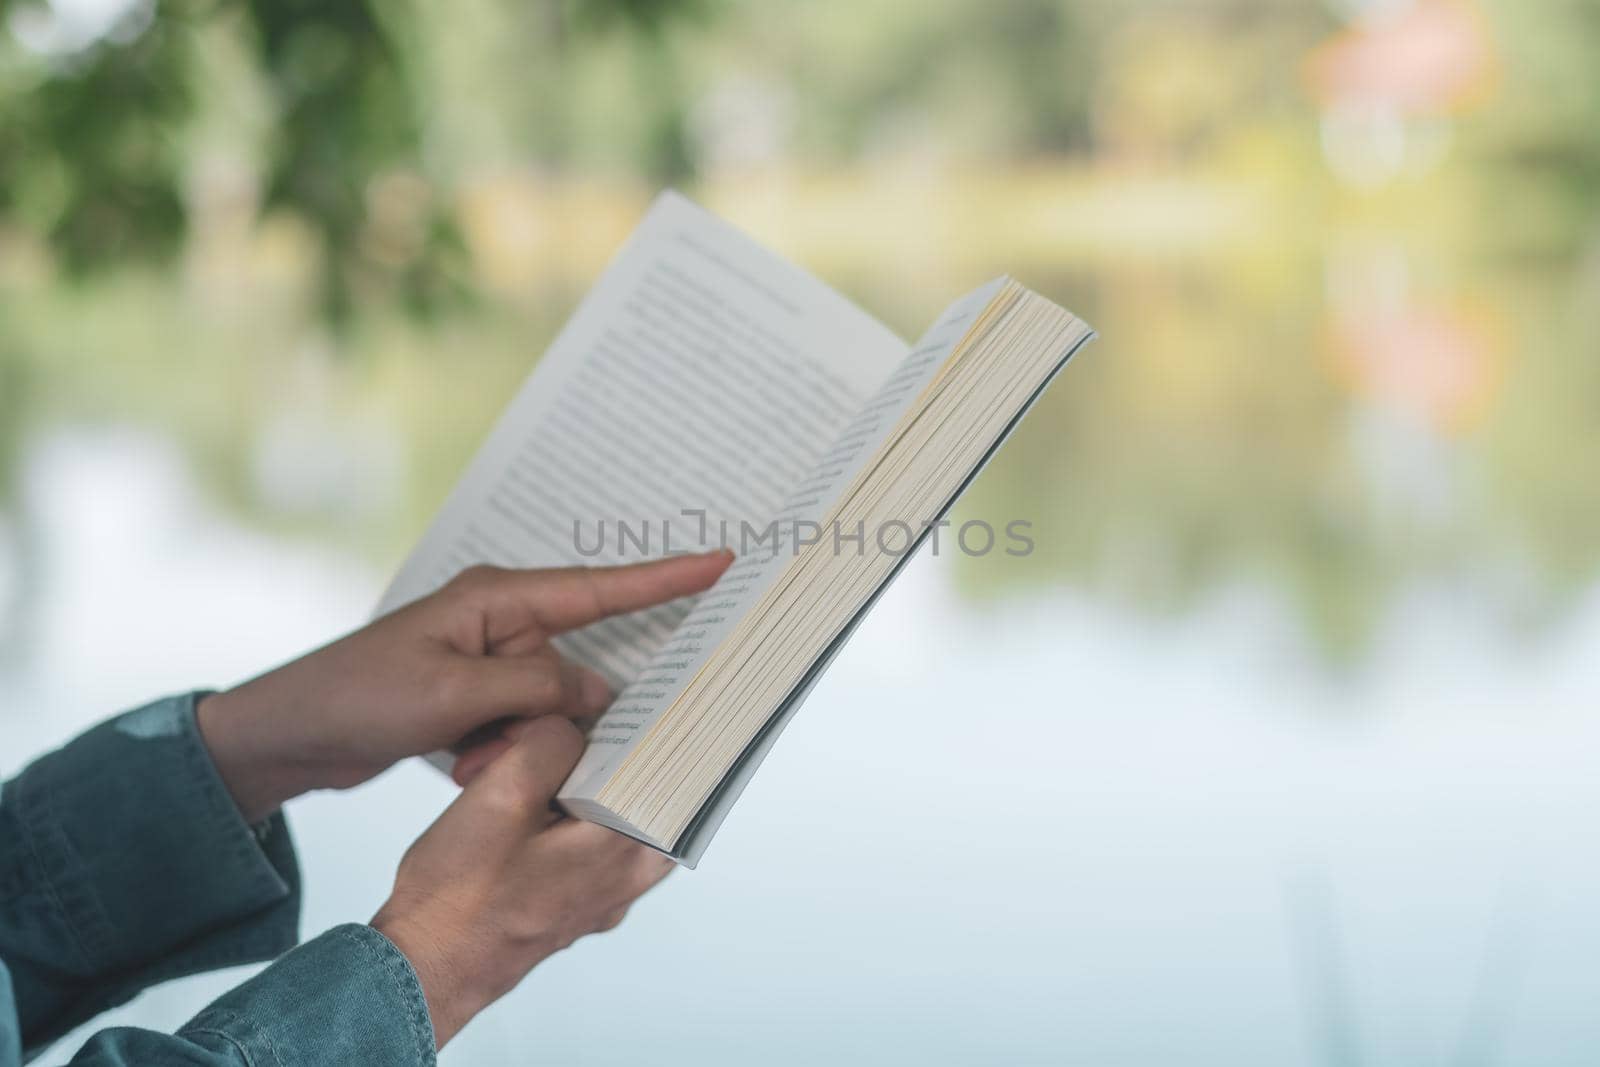 Woman is reading book in beautiful park and pond relax and peaceful environment by Suwant